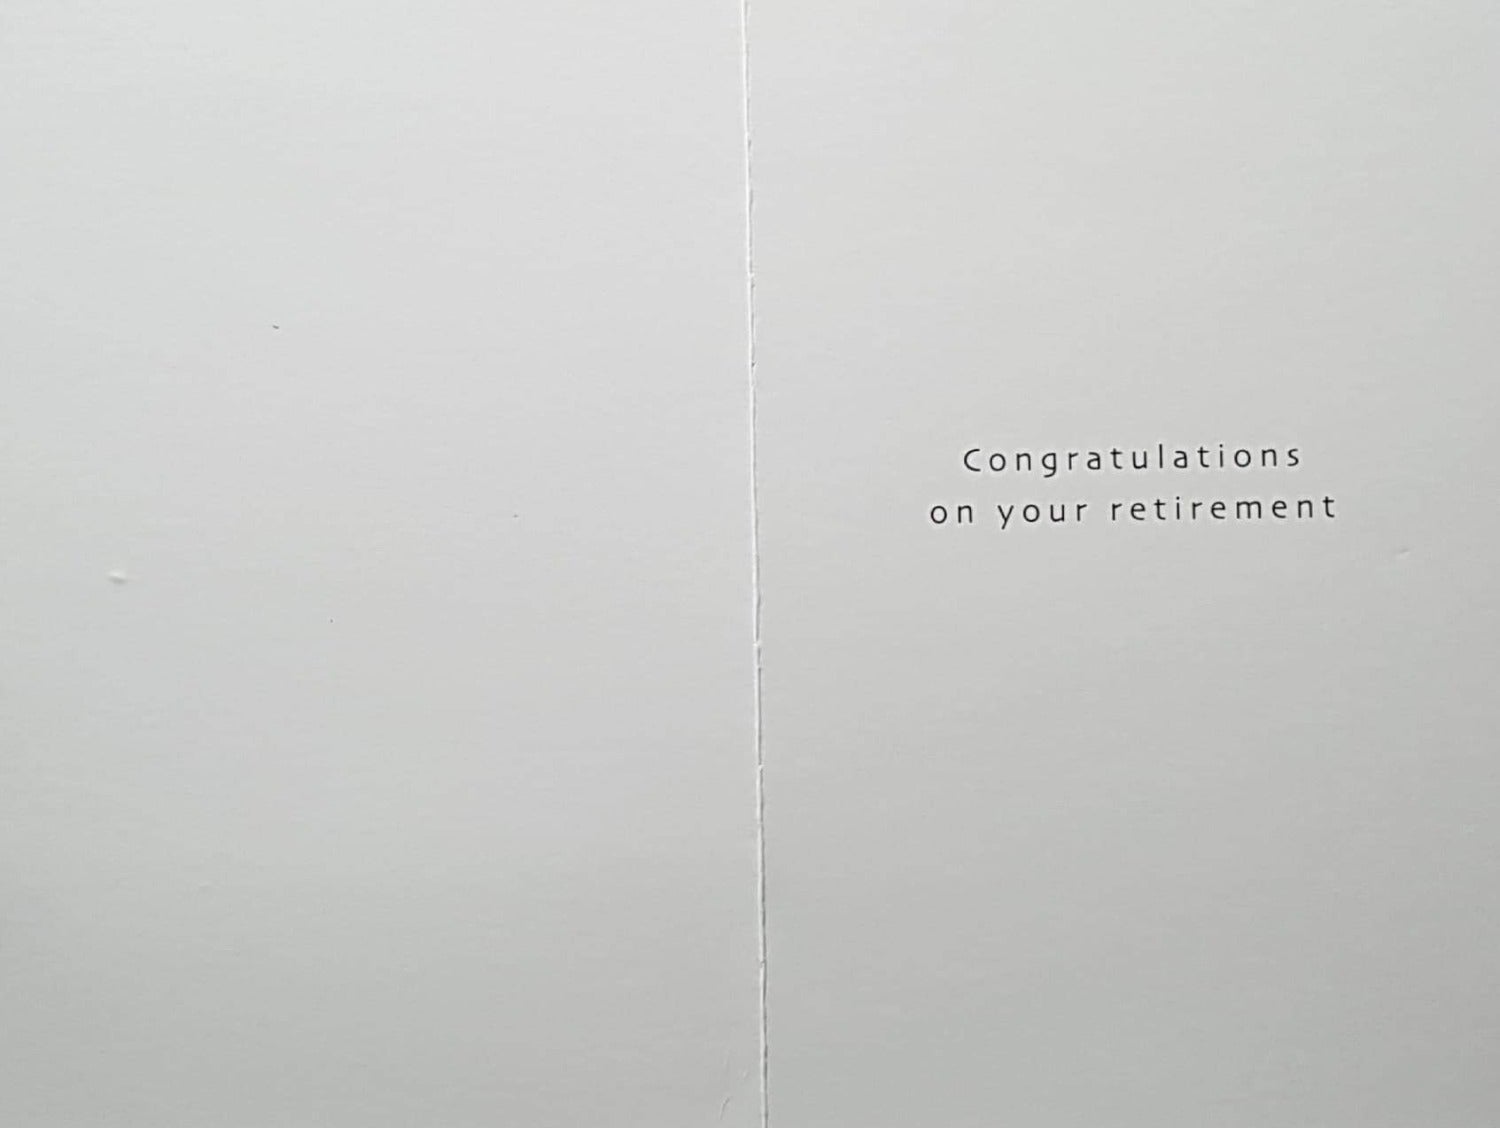 Congratulations Card - Retirement / 'Relax And Enjoy' & A Dog Sleeping On A Chair